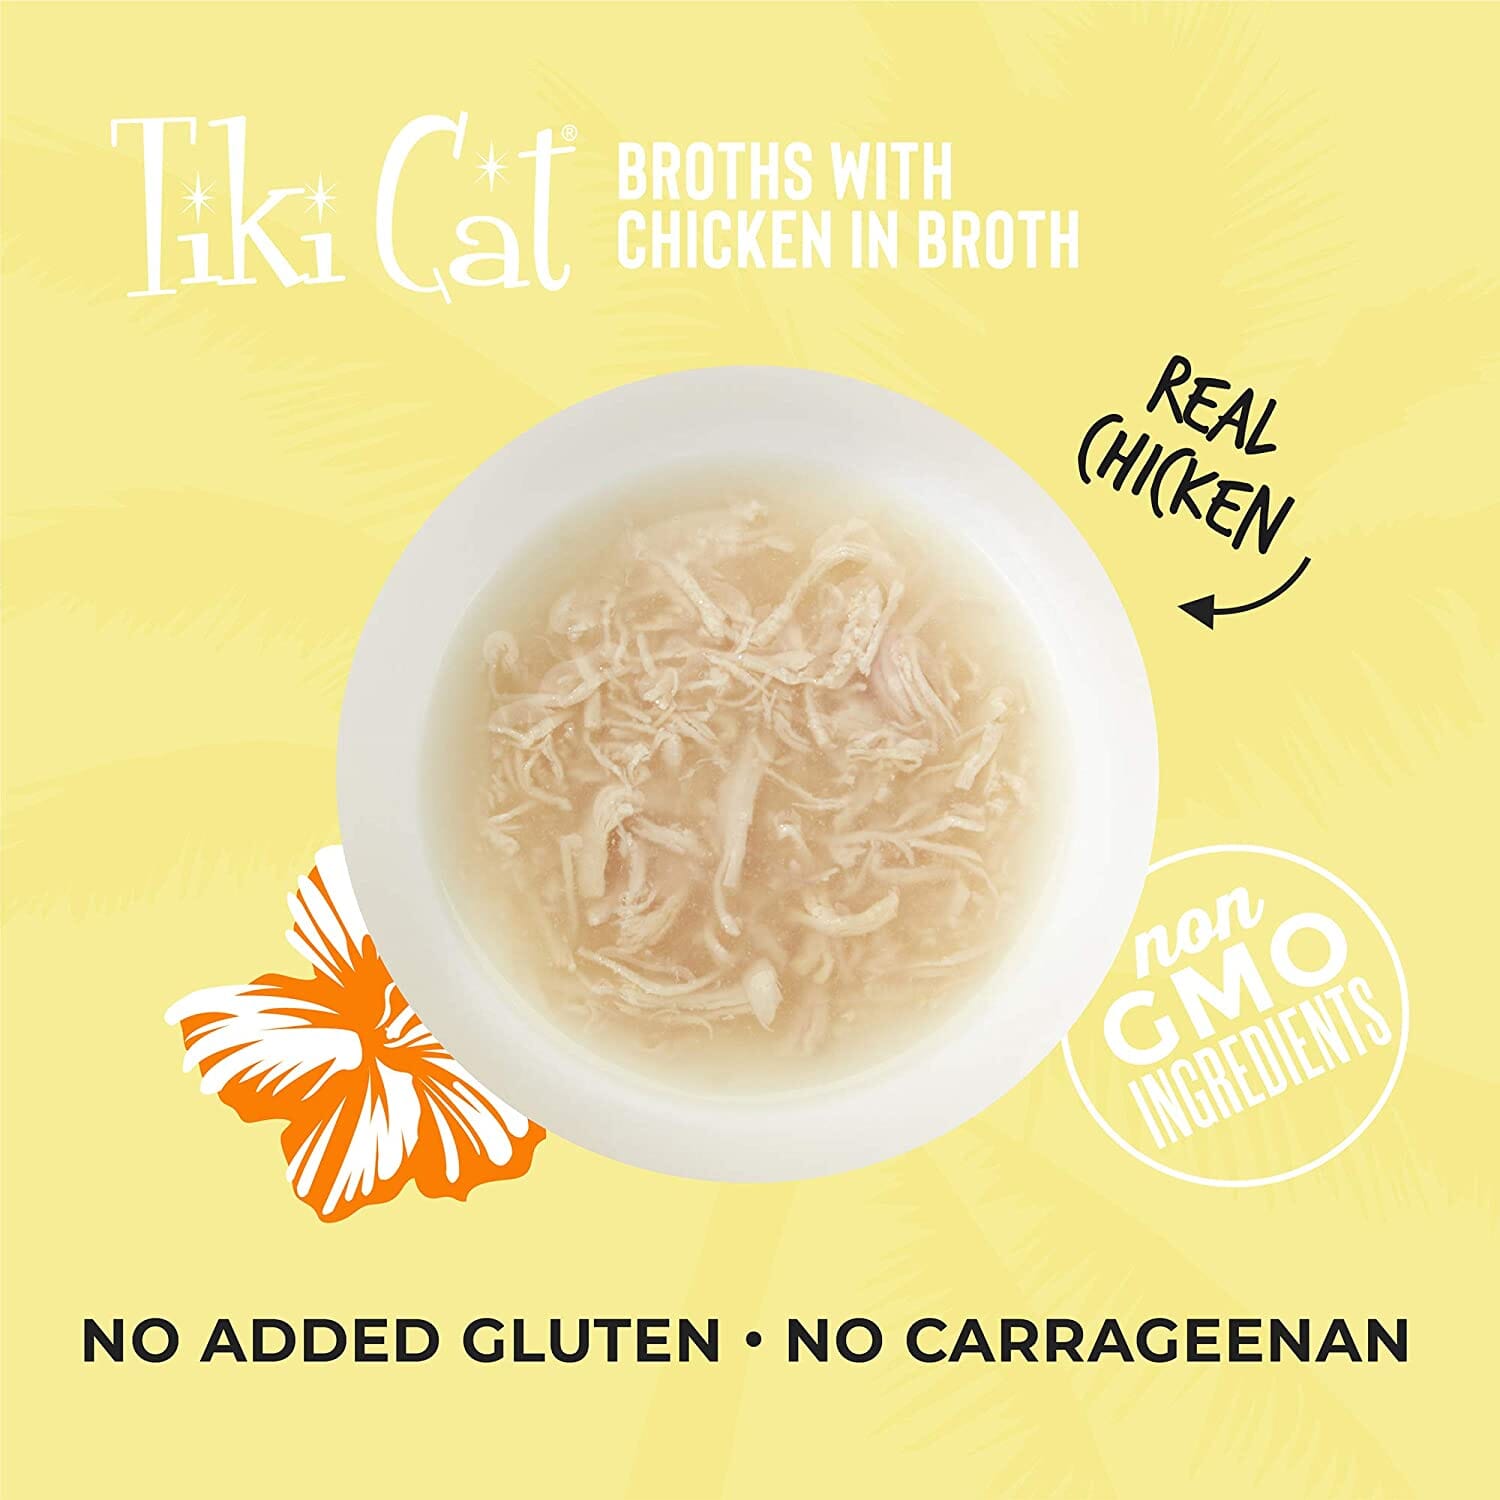 Tiki Cat Chicken Broth Cat Food Toppers - 1.3 Oz Pouch - Pack of 12  